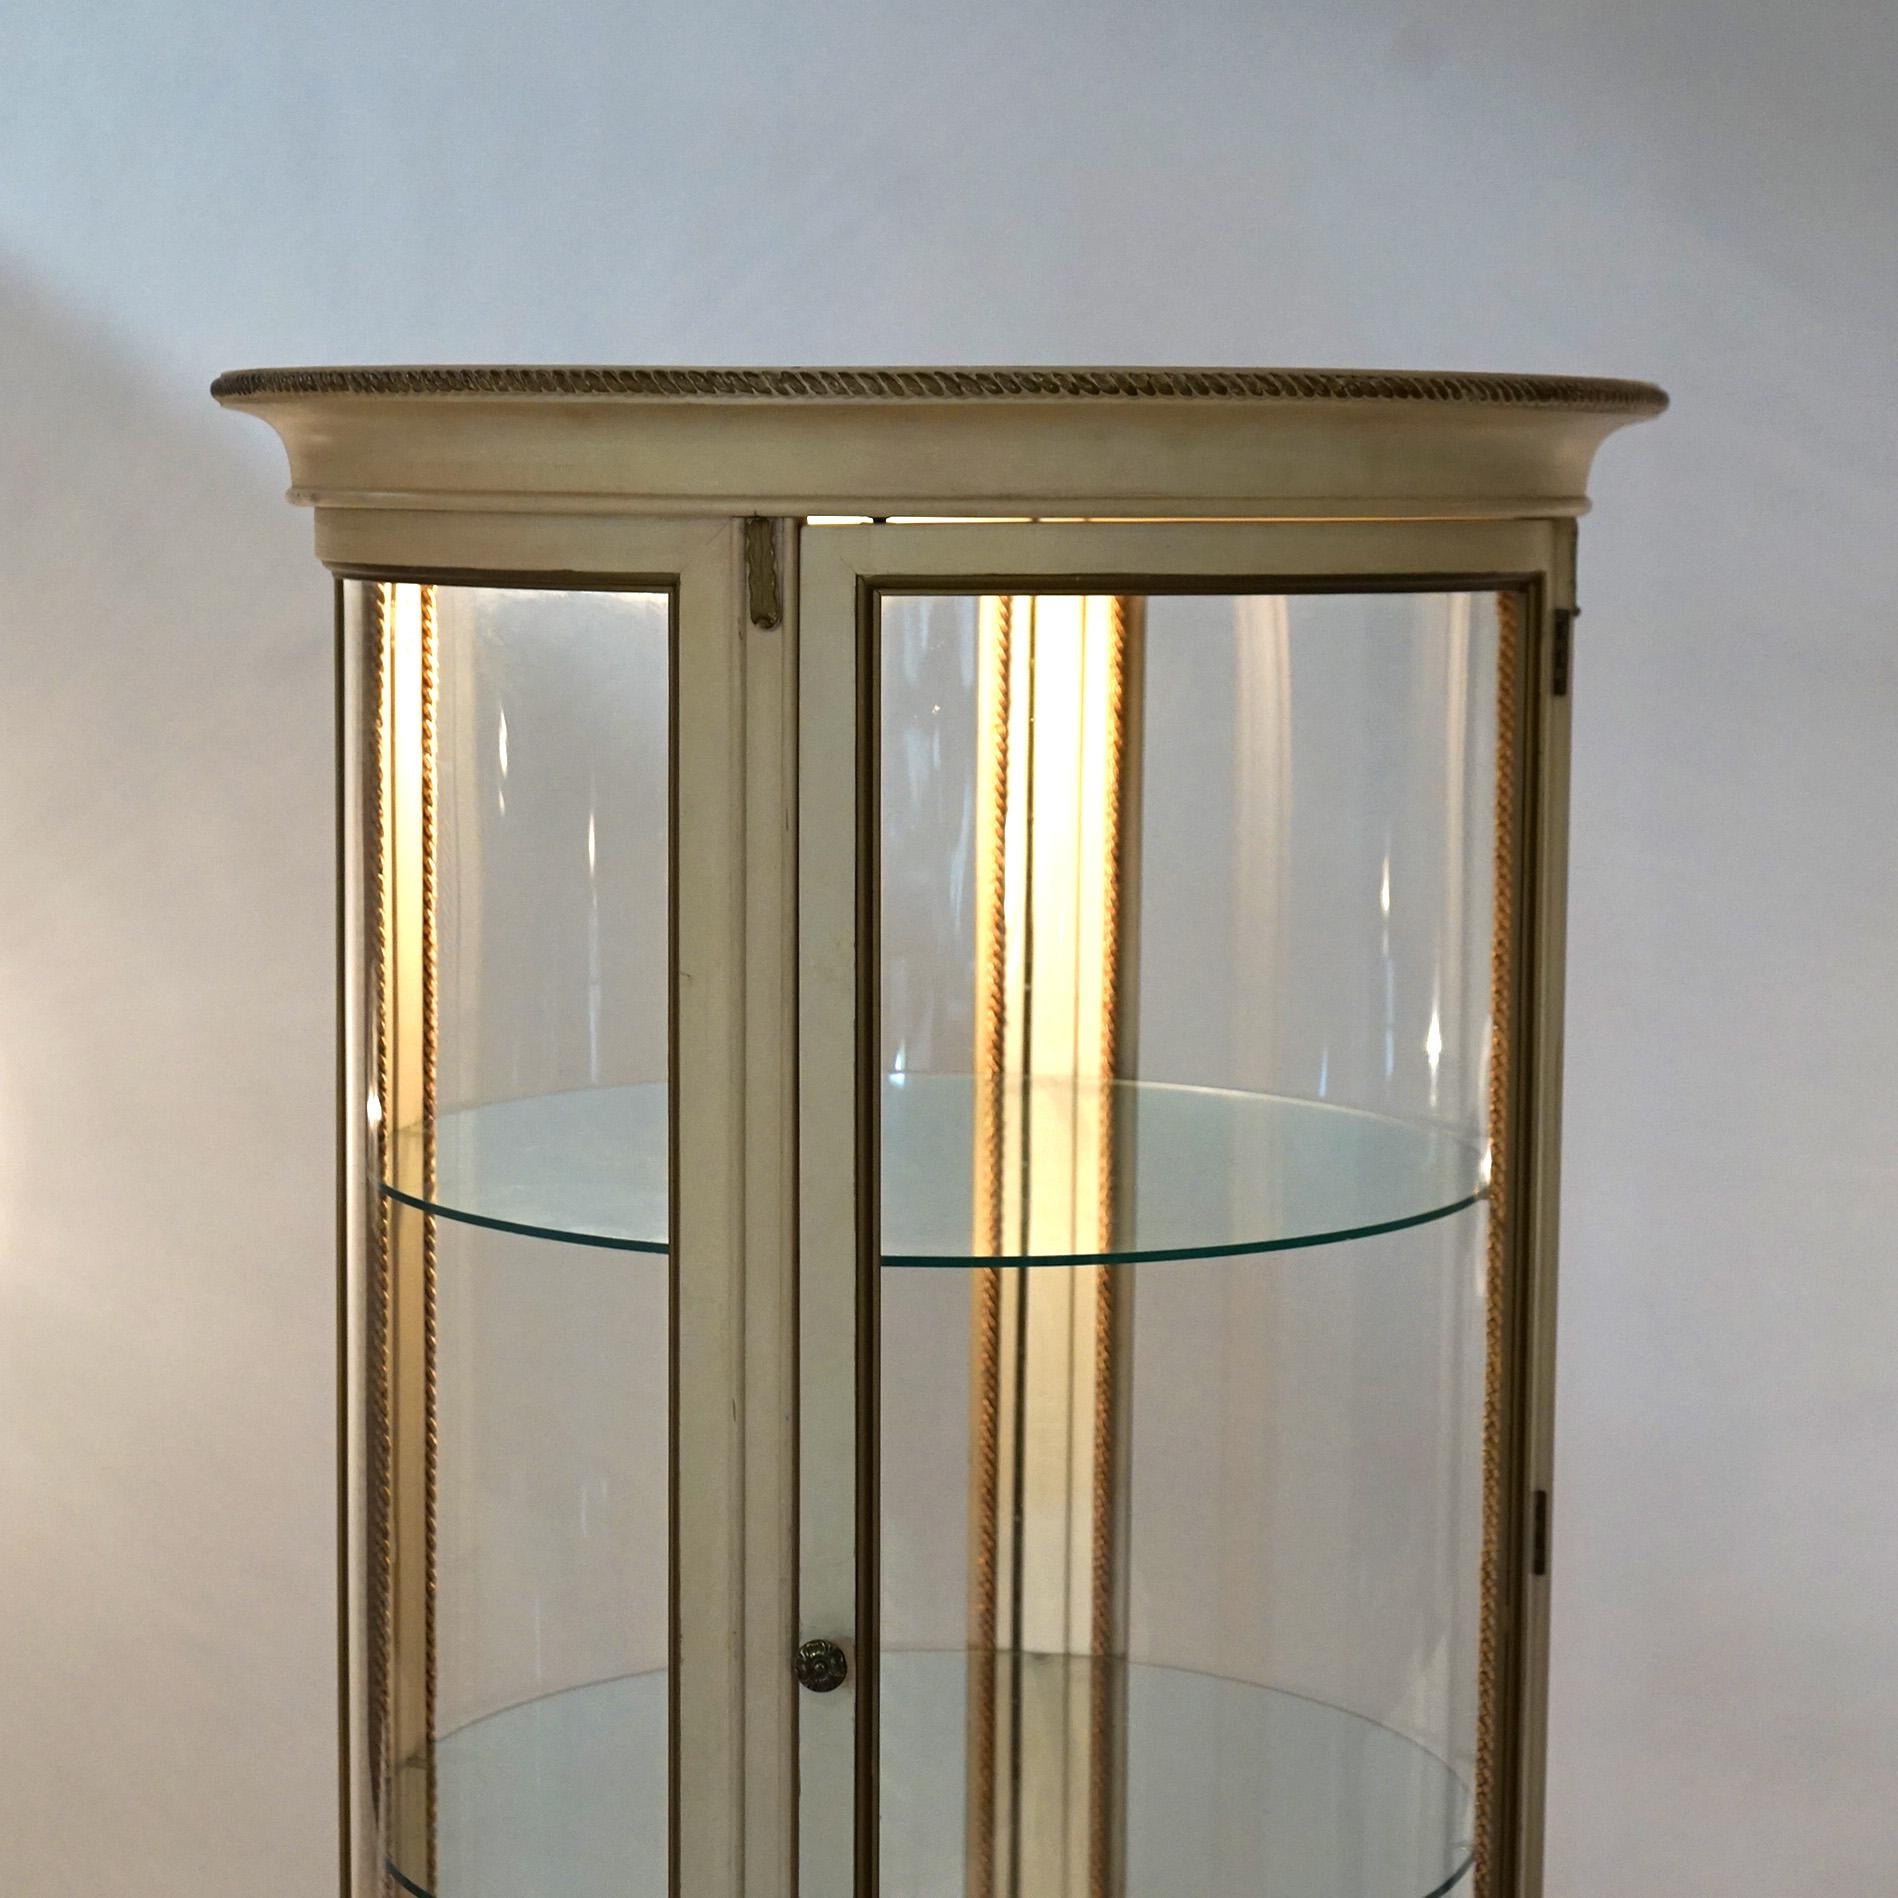 20th Century French Style Circular Glass Display Vitrine on Pedestal, Painted & Gilt, 20th C